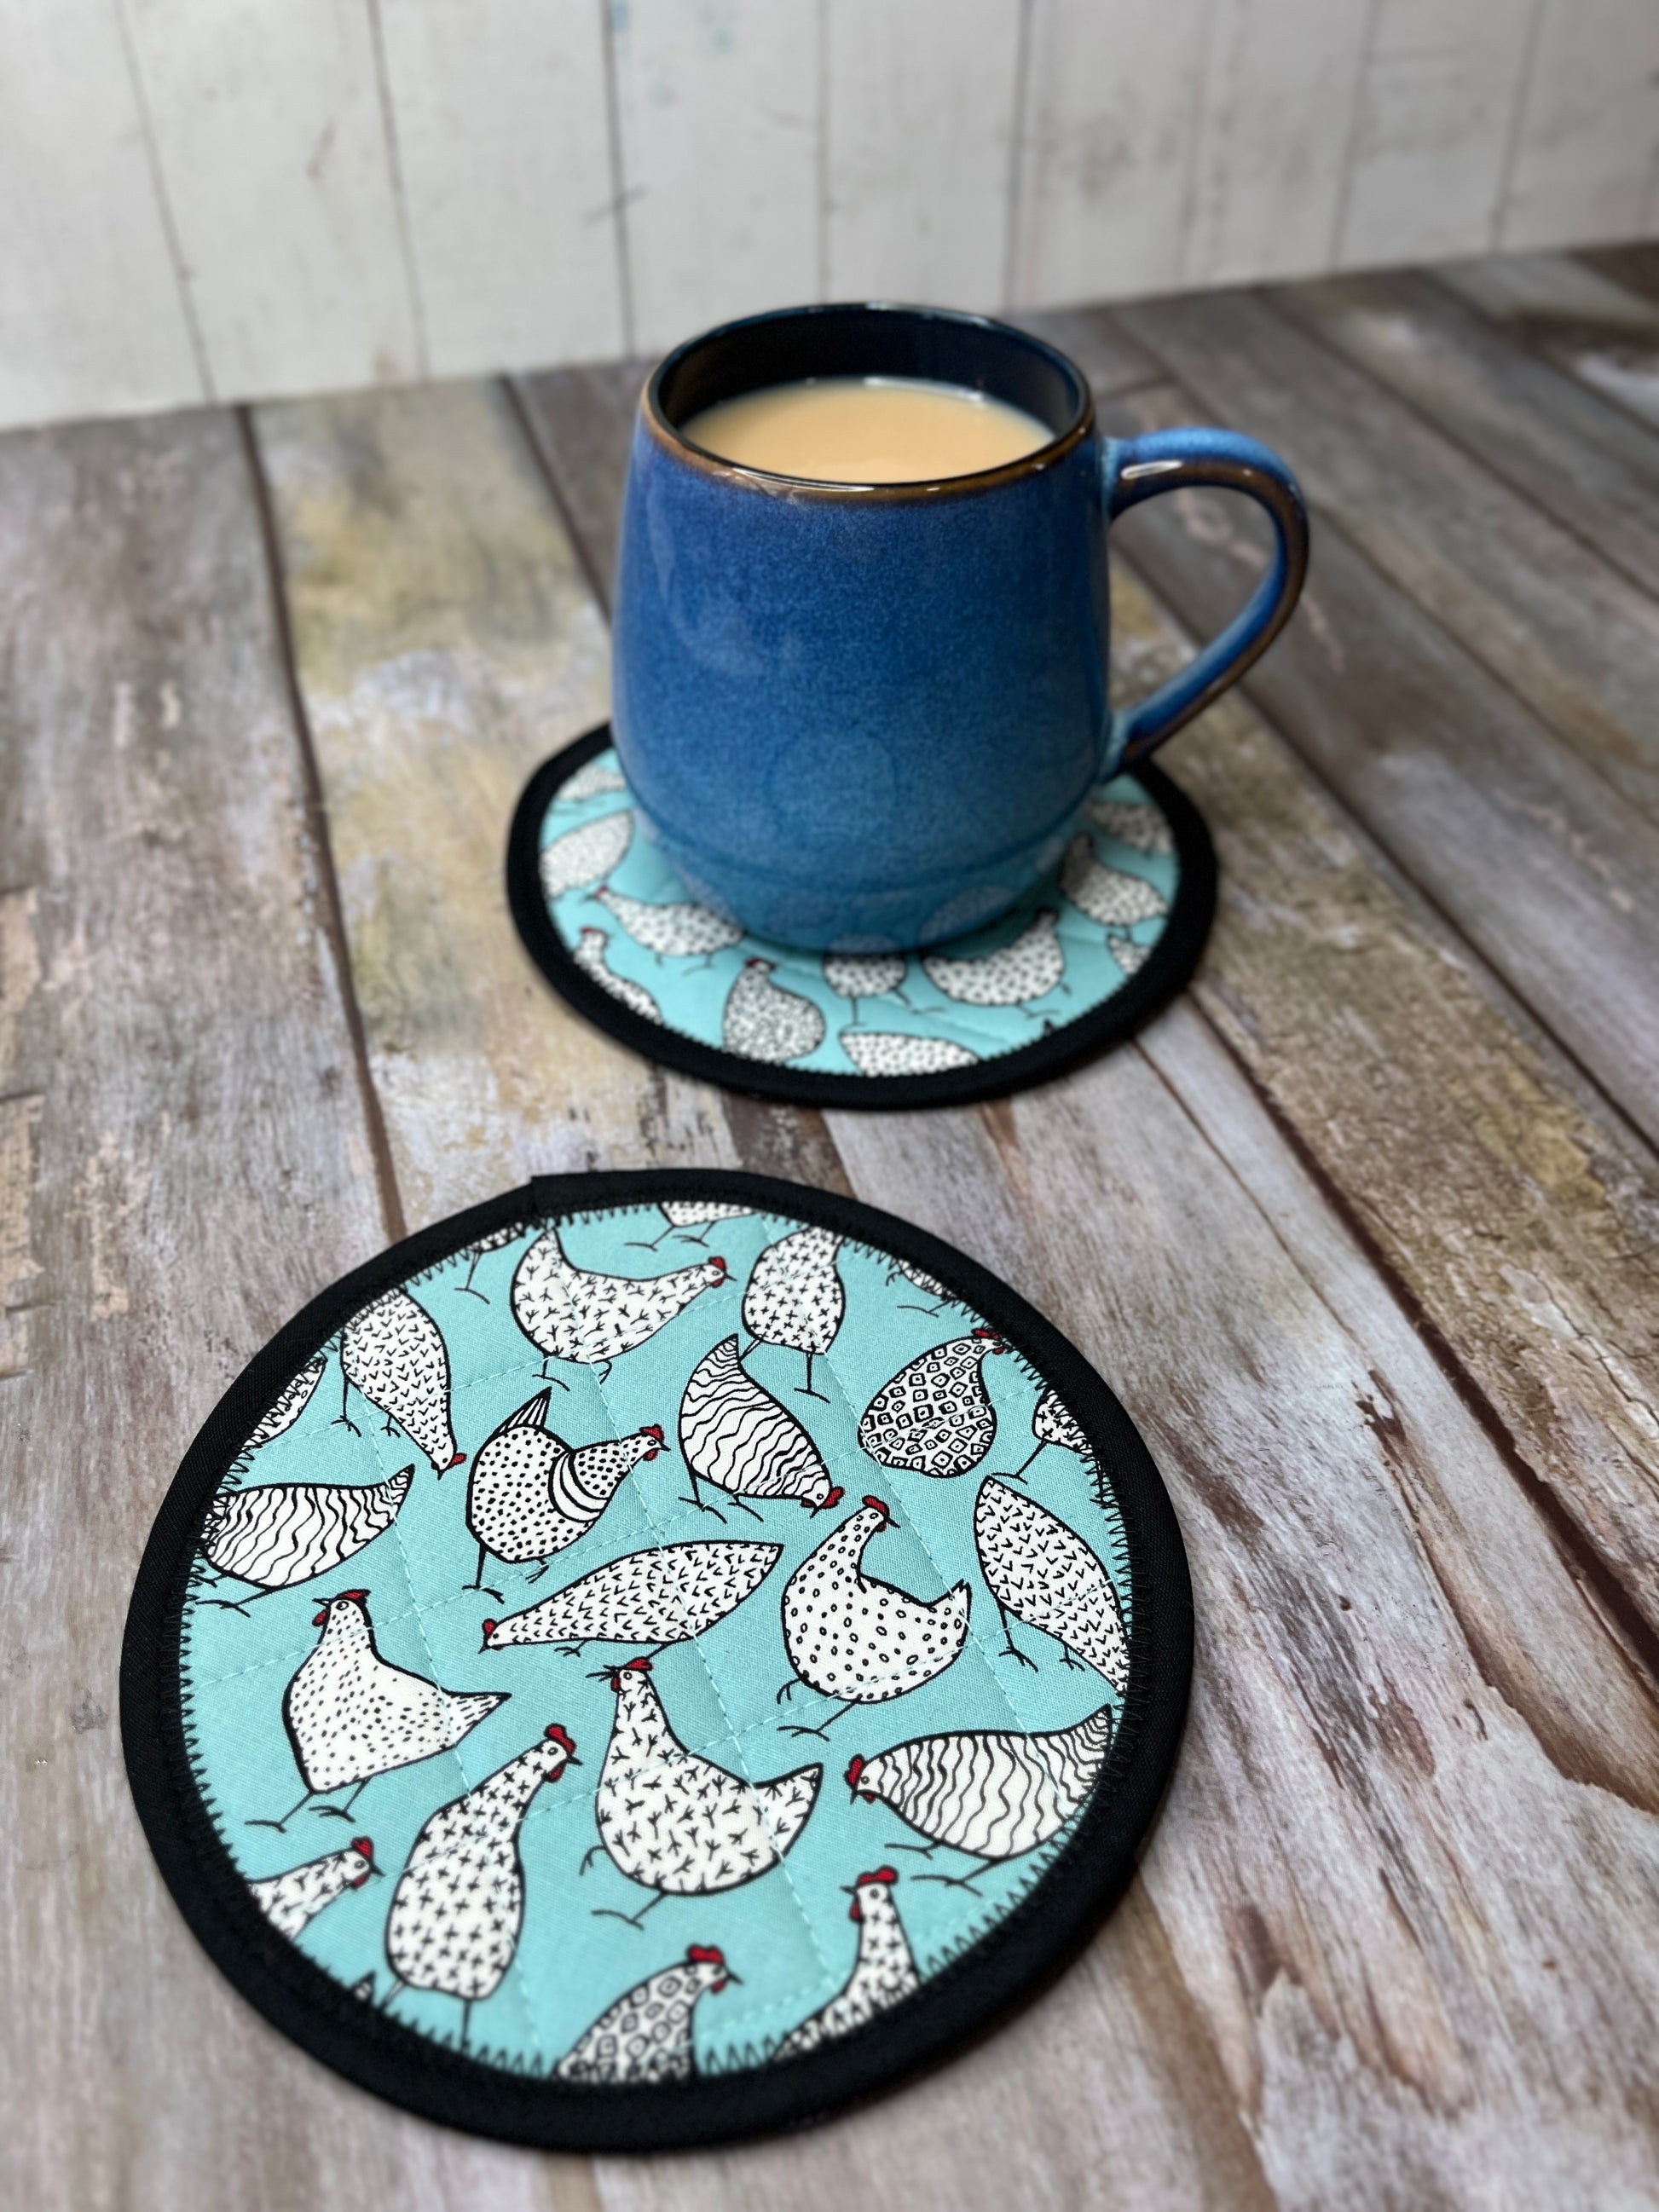 Round Fabric Coasters Set of 2 - Chickens - Uphouse Crafts